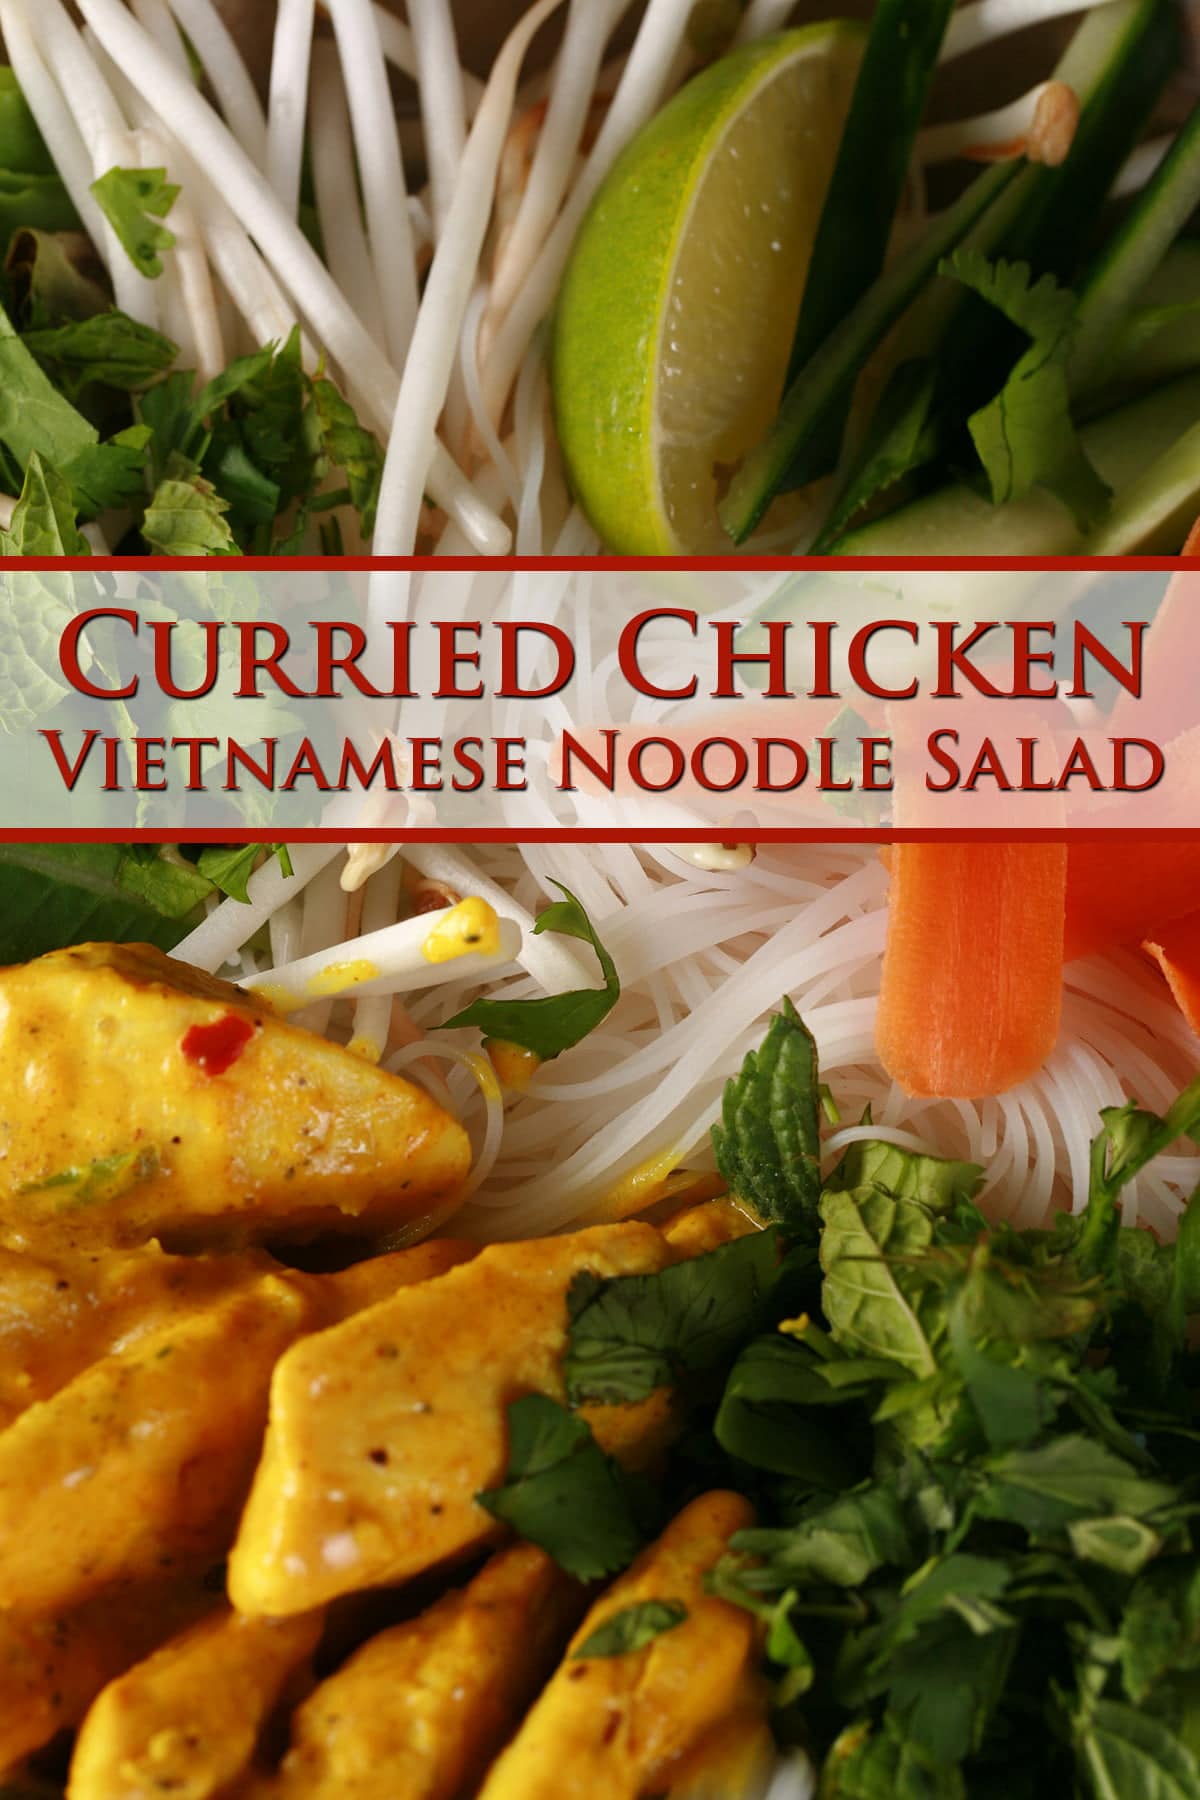 A close up view of a bowl of curried chicken Vietnamese noodle salad. Thin vermicelli noodles are visible under an arrangement of curred chicken pieces, cilantro and mint, carrot ribbons, bean sprouts, and lime wedges.